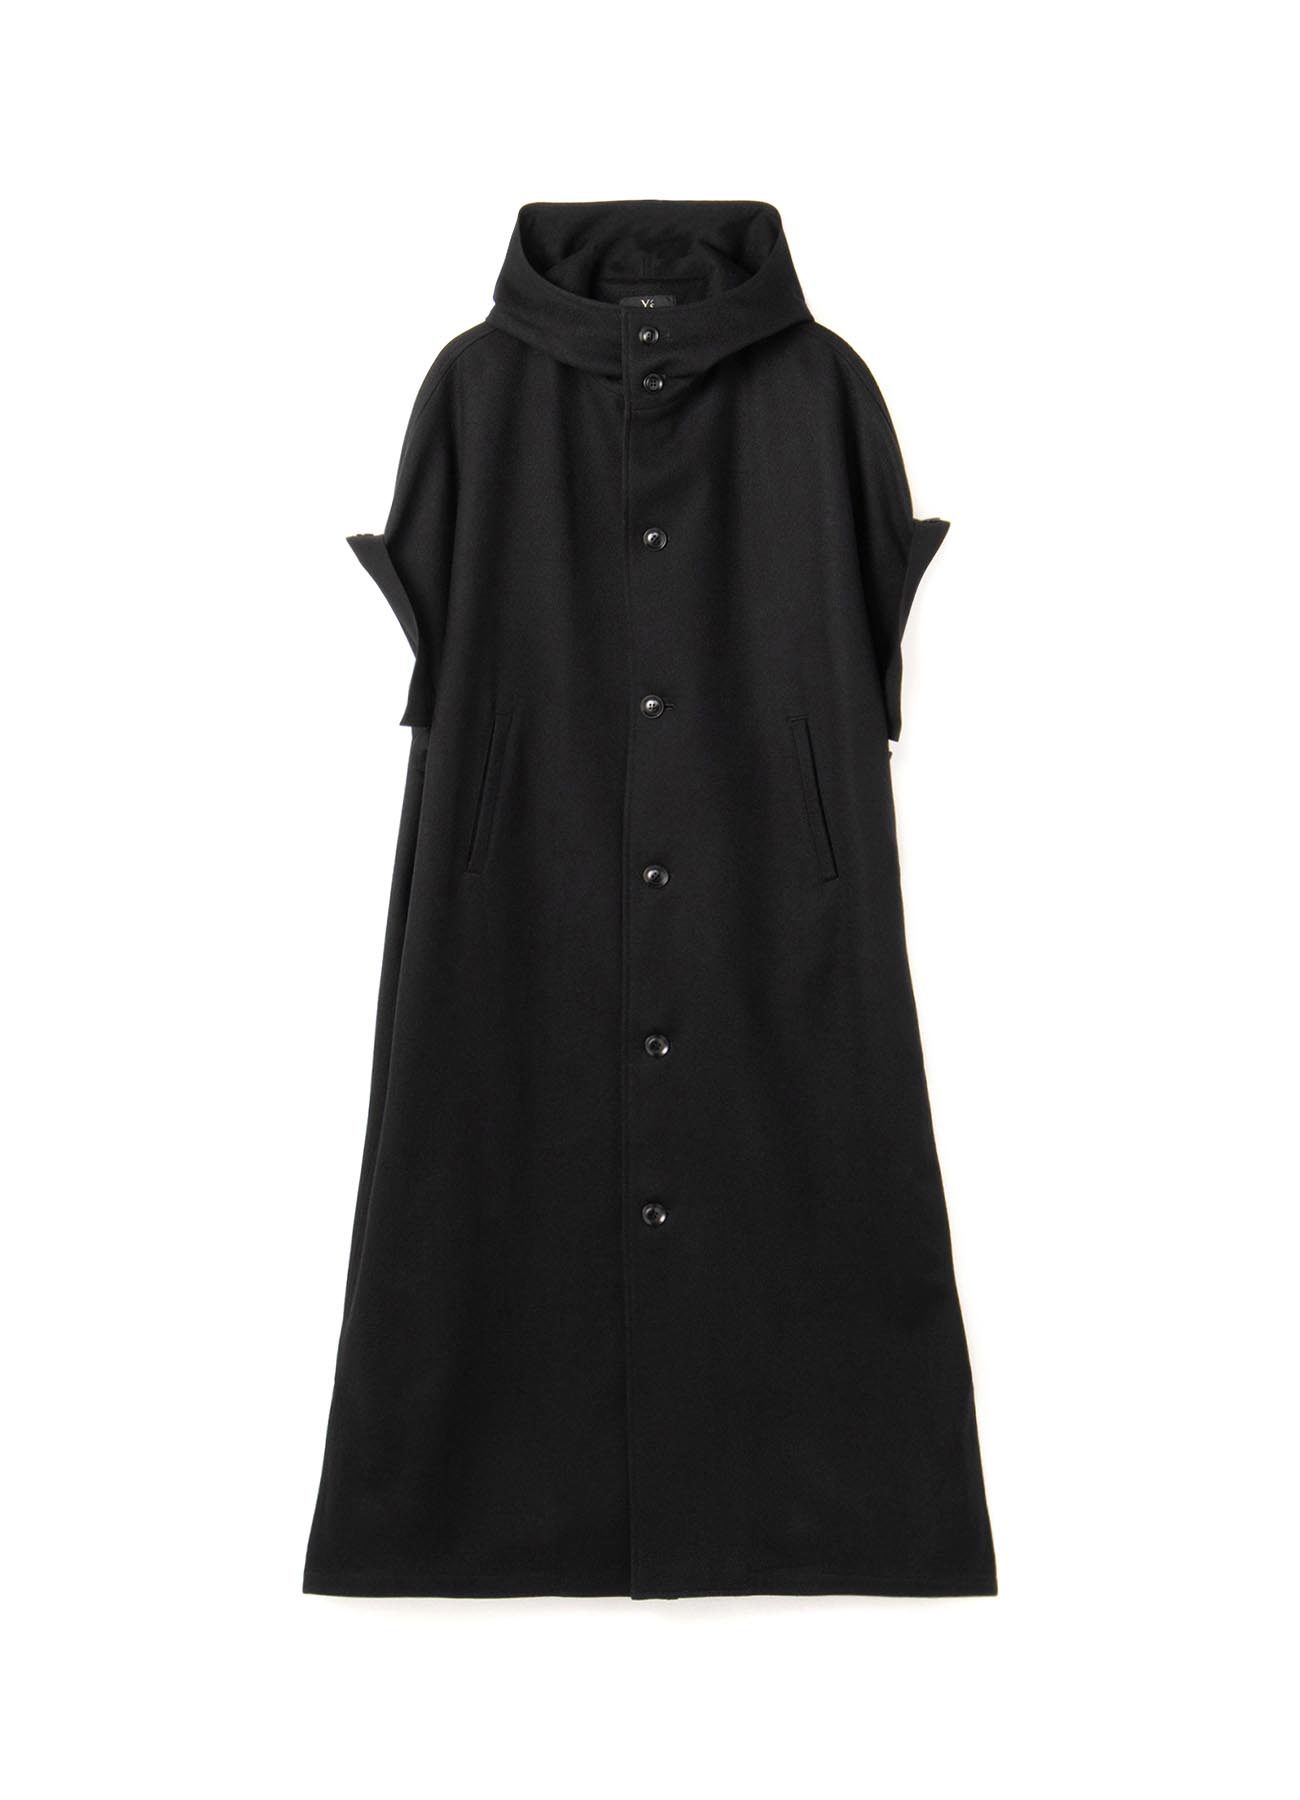 FLANNEL FRENCH SLEEVE HOODED DRESS